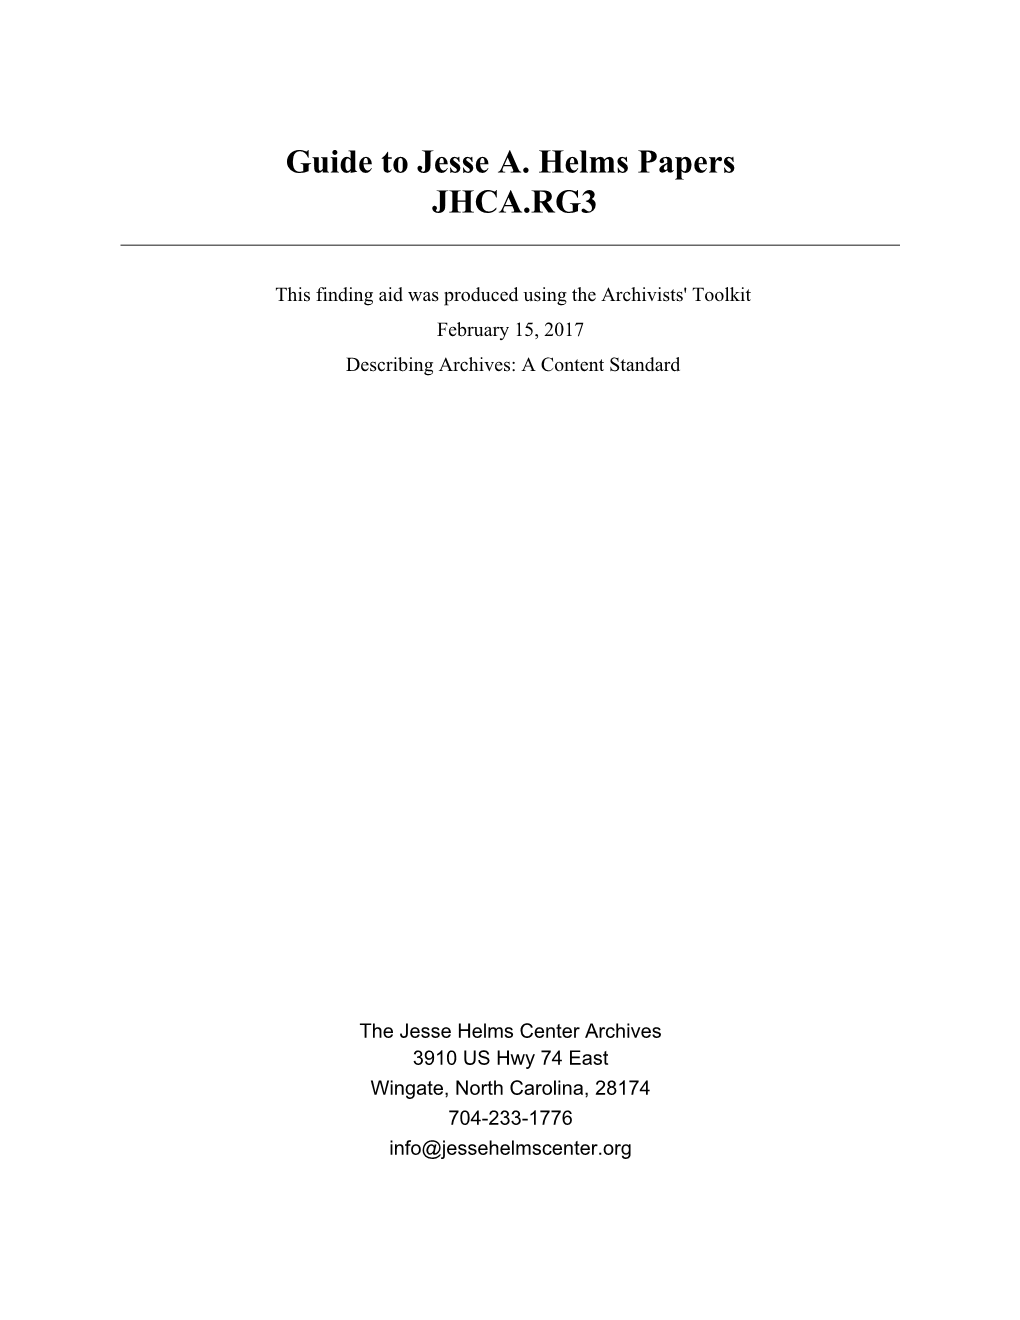 Guide to Jesse A. Helms Papers JHCA.RG3